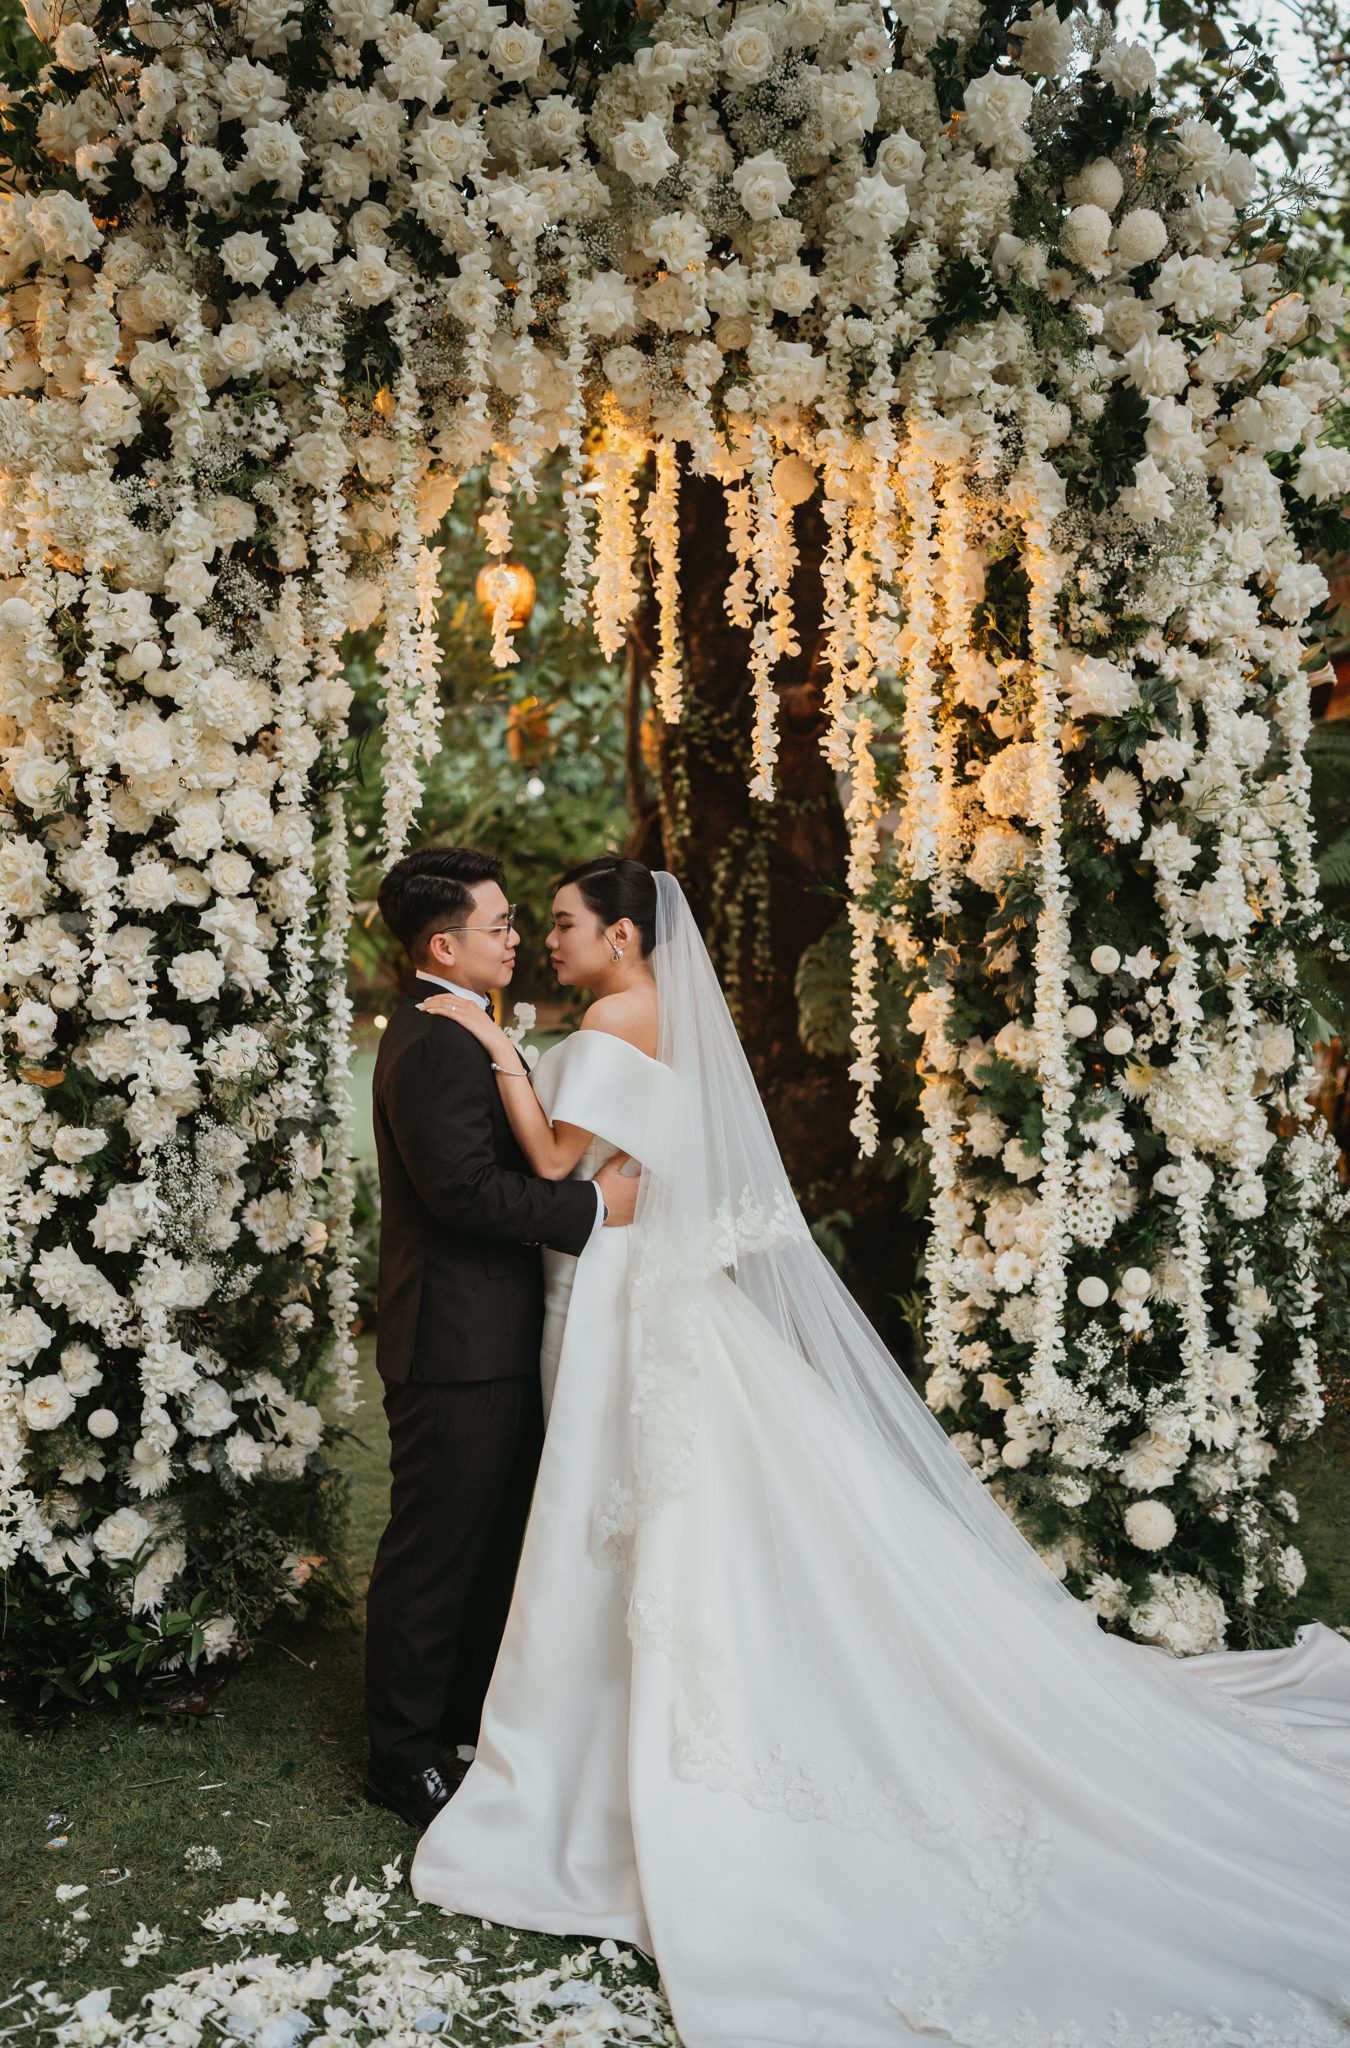 Saigon intimate wedding at An Lam Retreat 4814 - The Planners